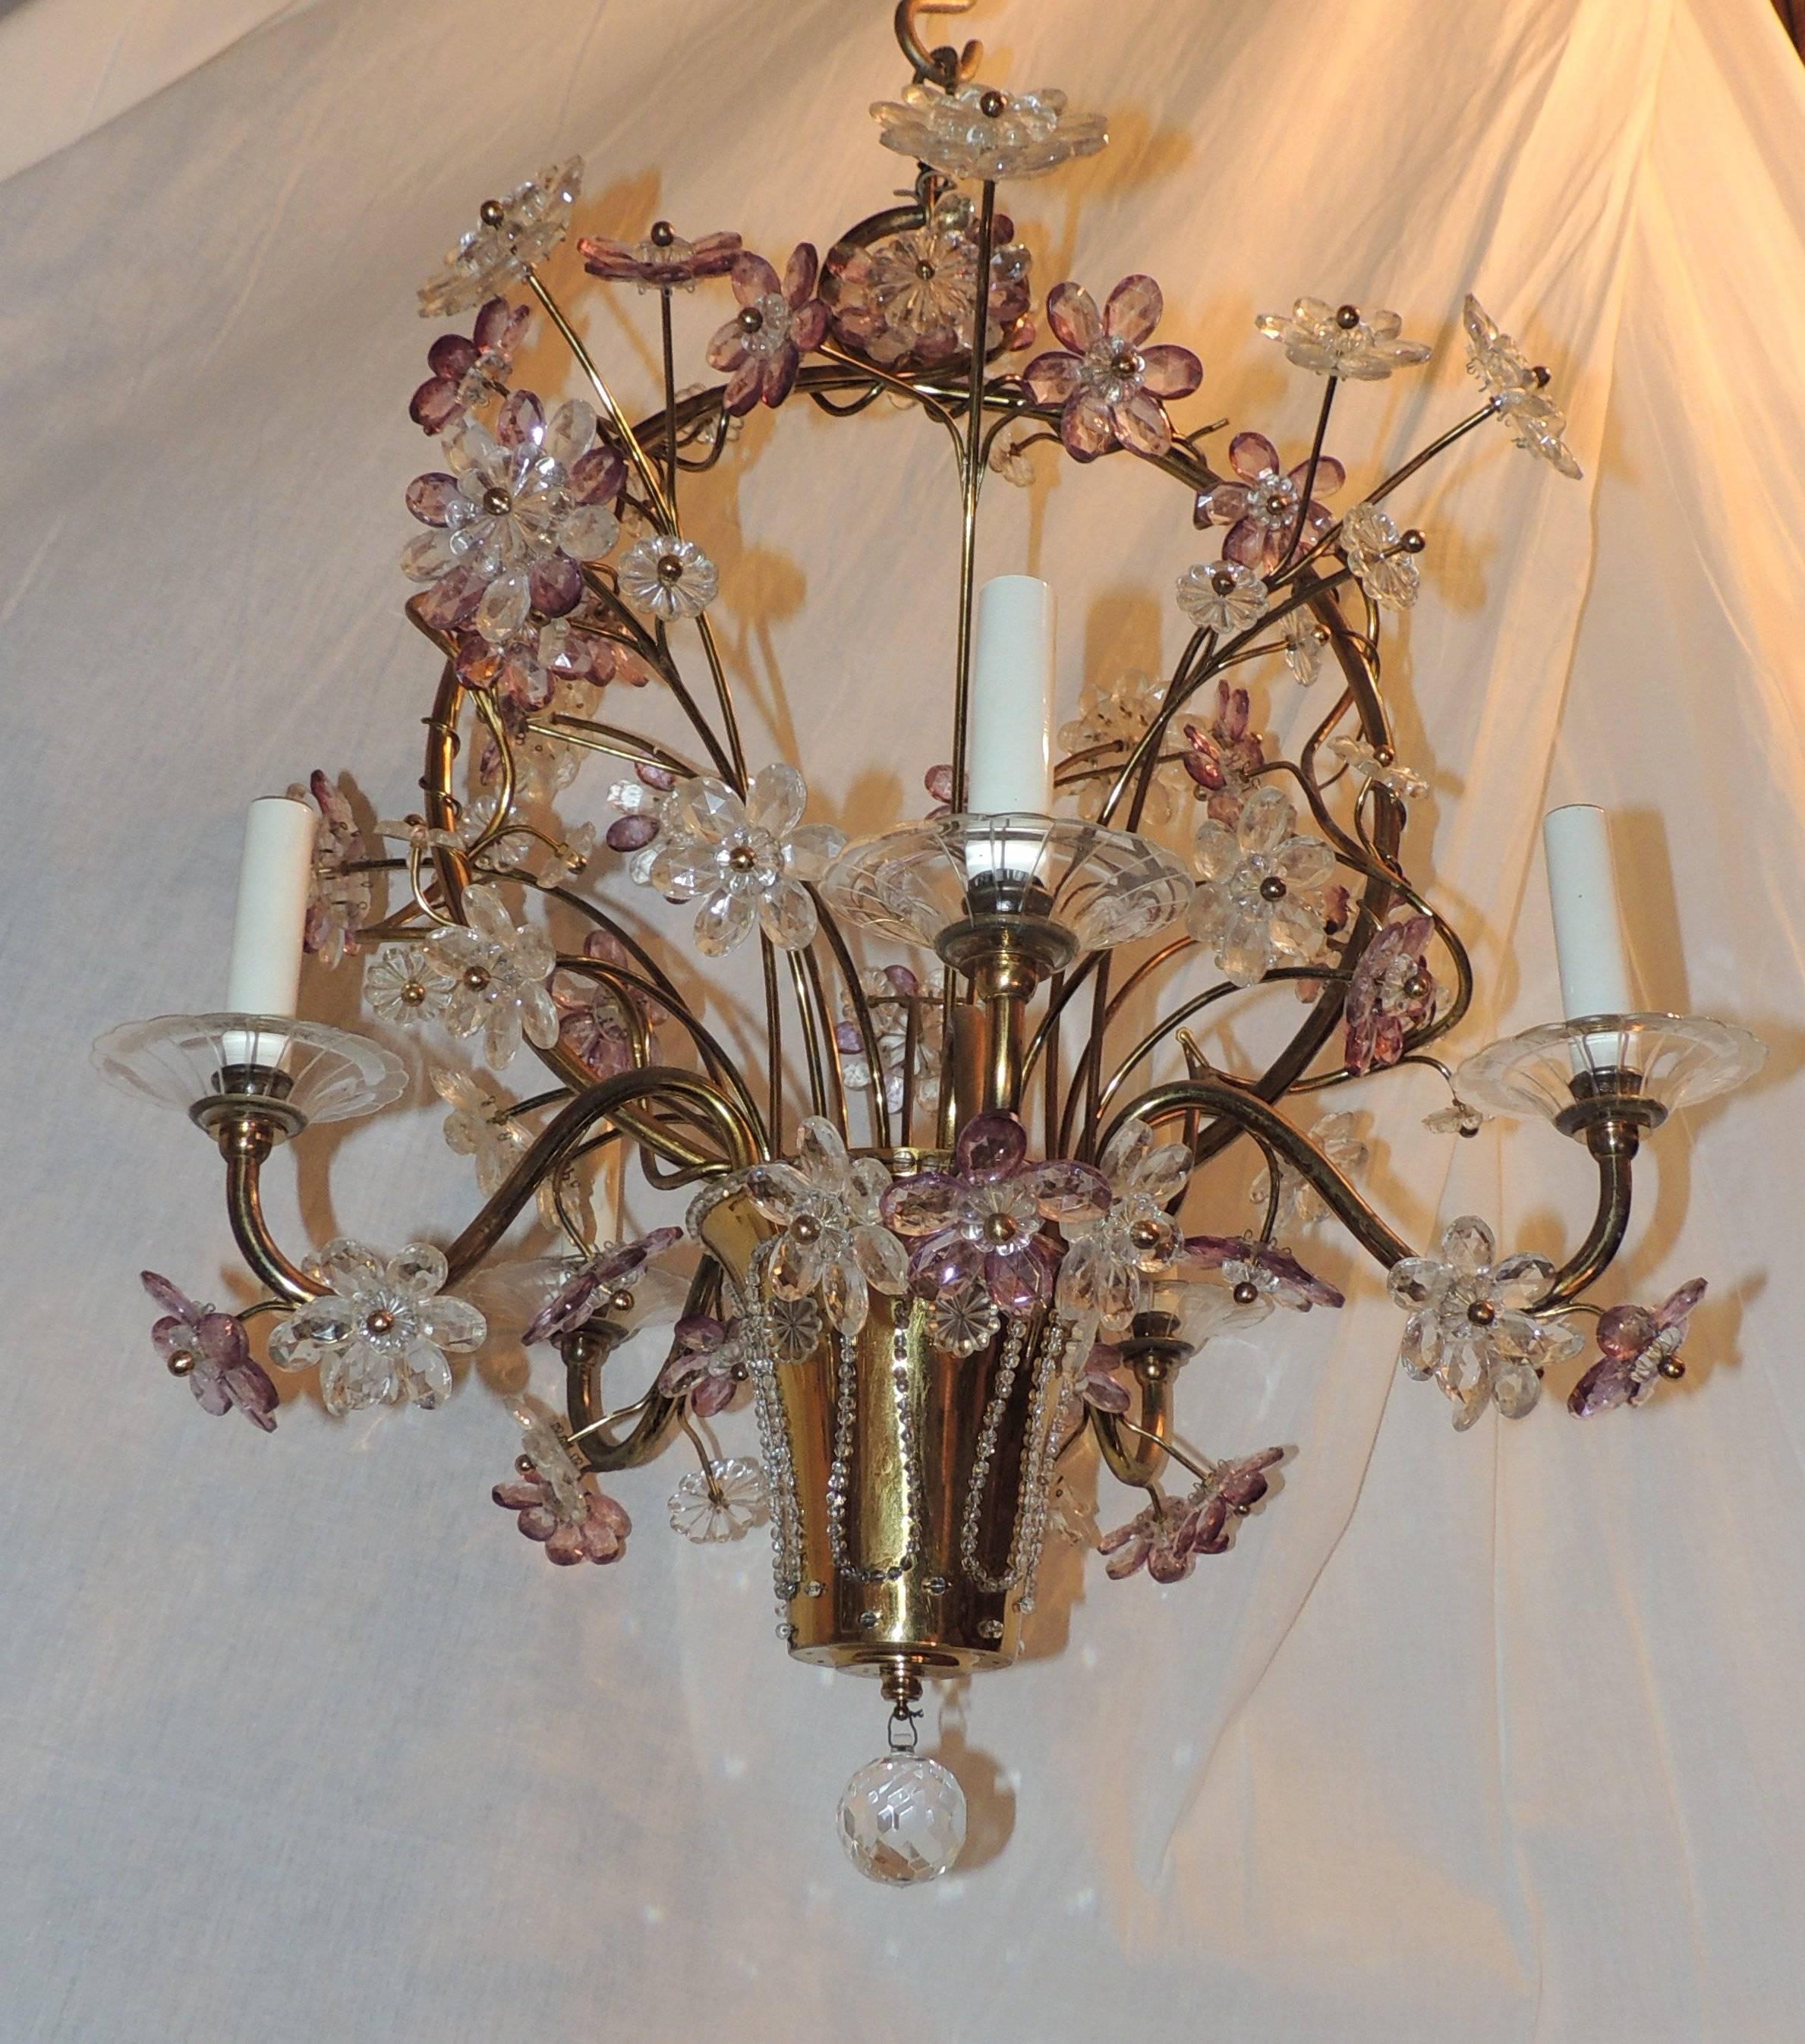 Wonderful chandelier with gilt bronze basket which is filled with amethyst and crystal flowers. The flowers also are entwined around the handle and through the five arms. The basket is wrapped with crystal beads and a cut crystal prism finishes this